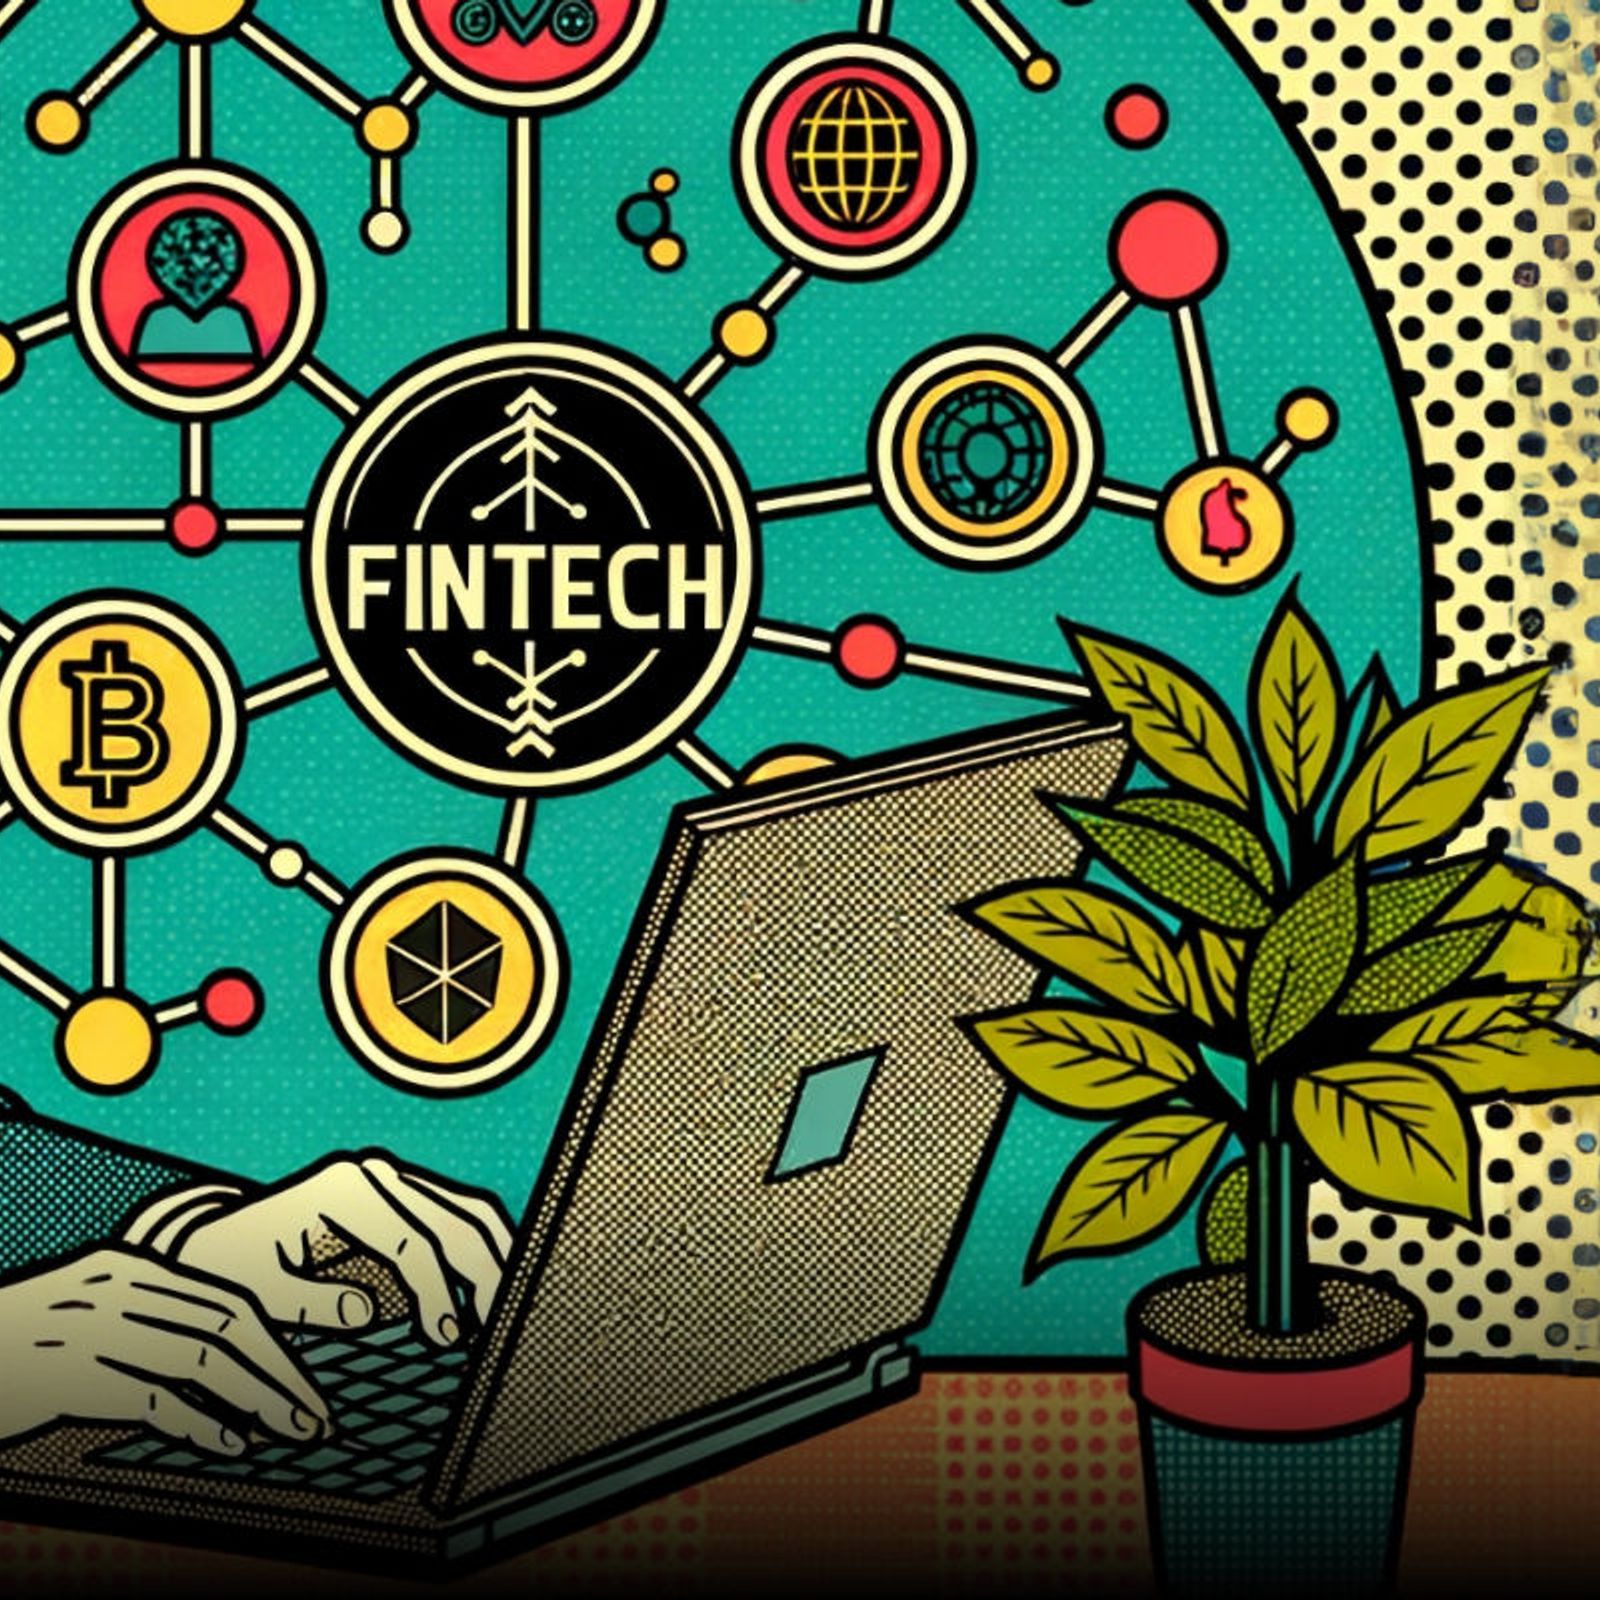 RBI's fintech repository triggers cheers and fears in equal measure